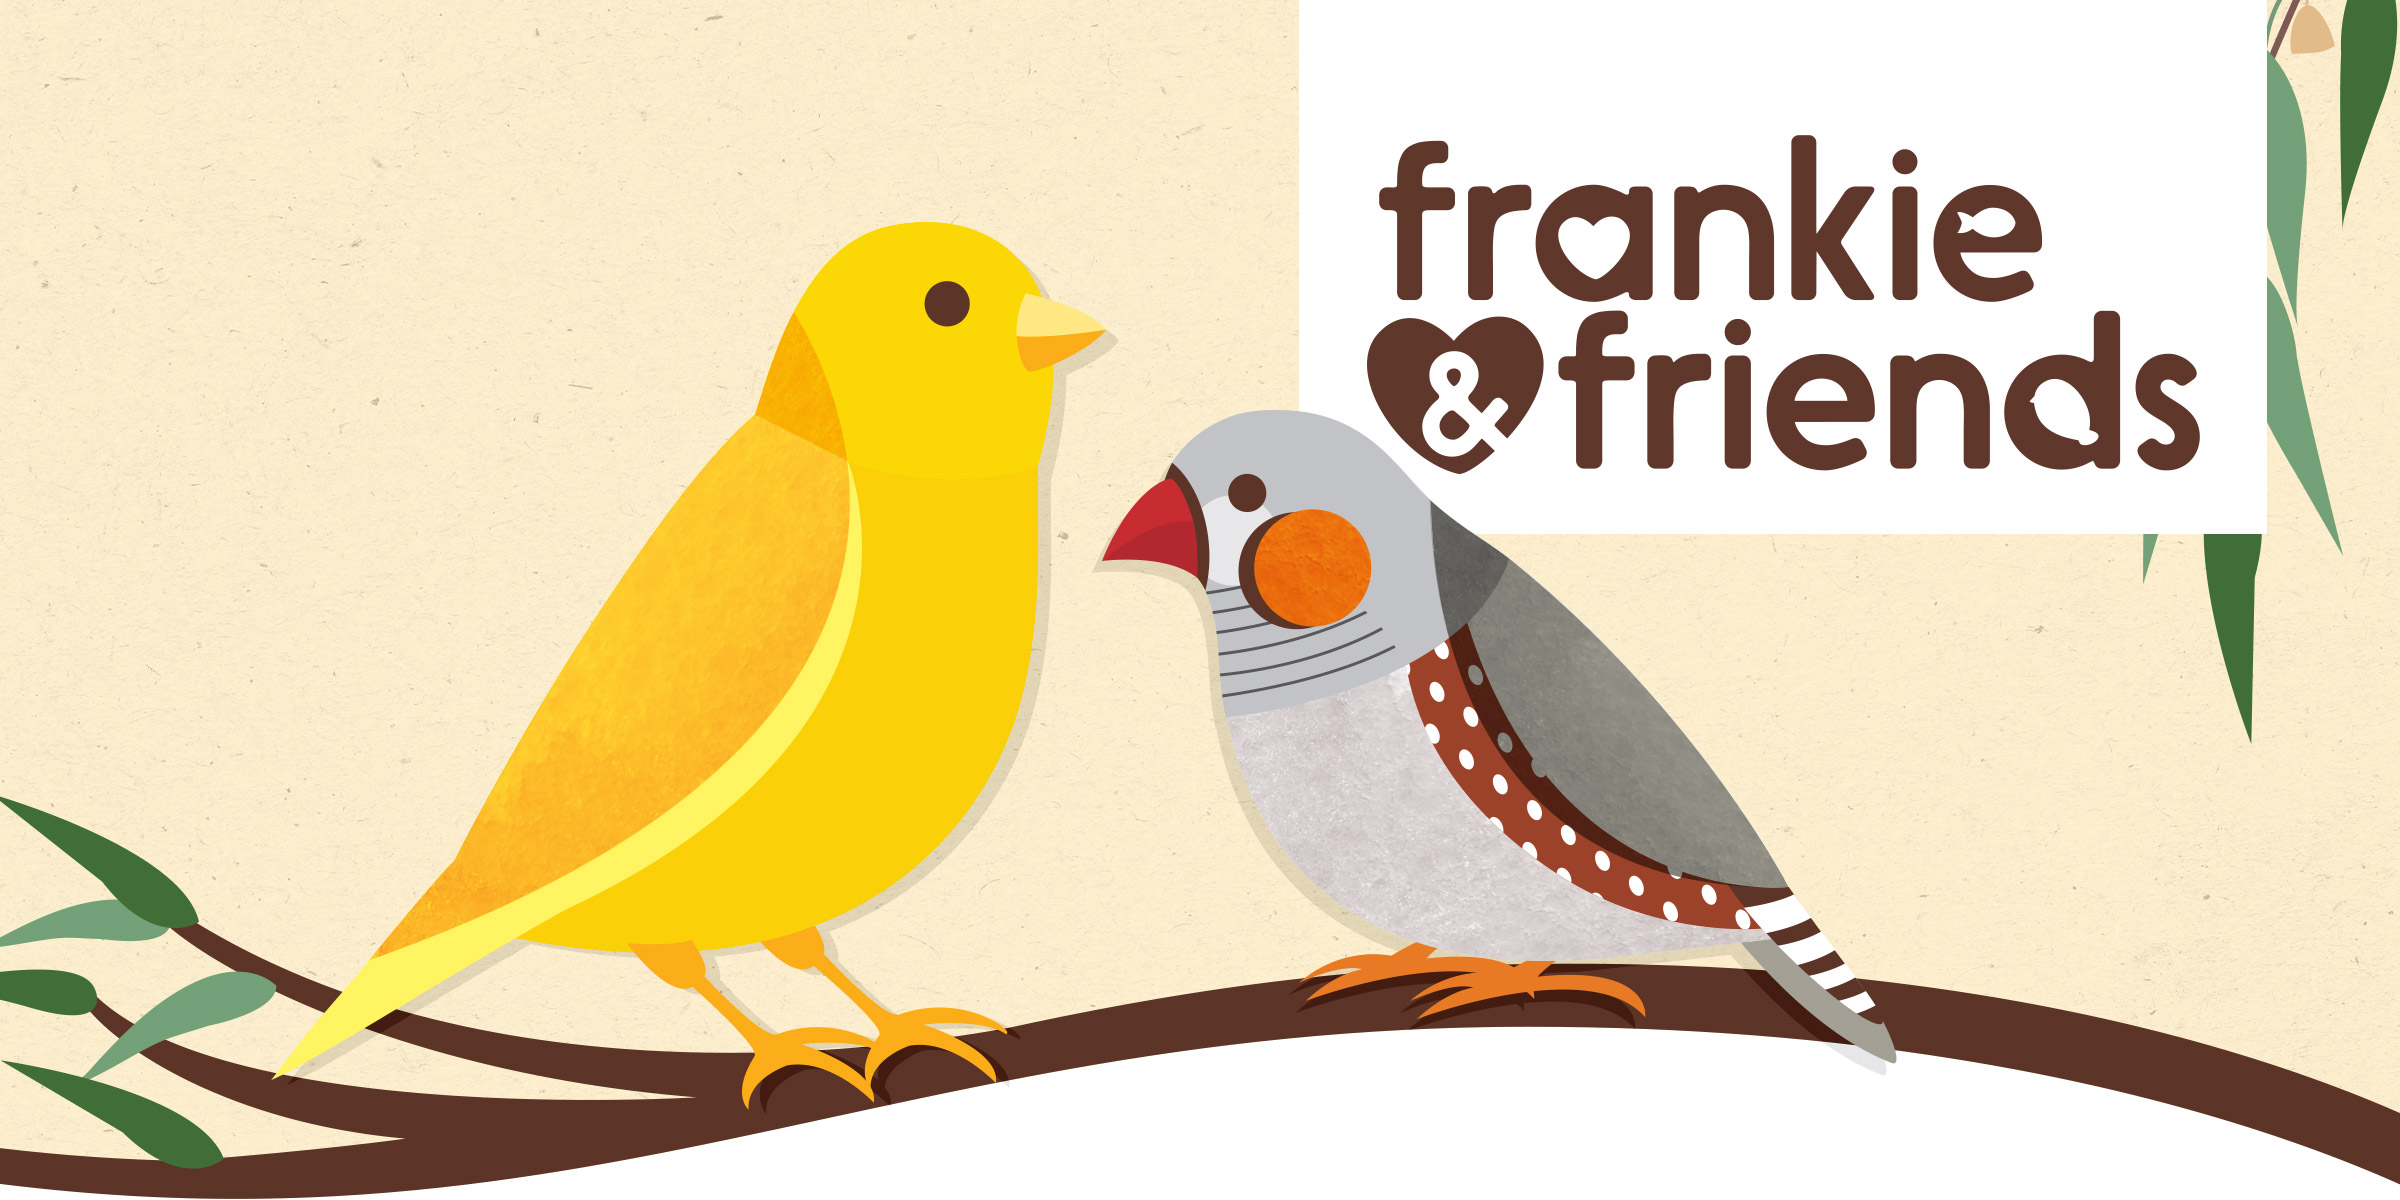 Frankie-and-friends-boxer-and-o-packaging-design-branding-woolworths